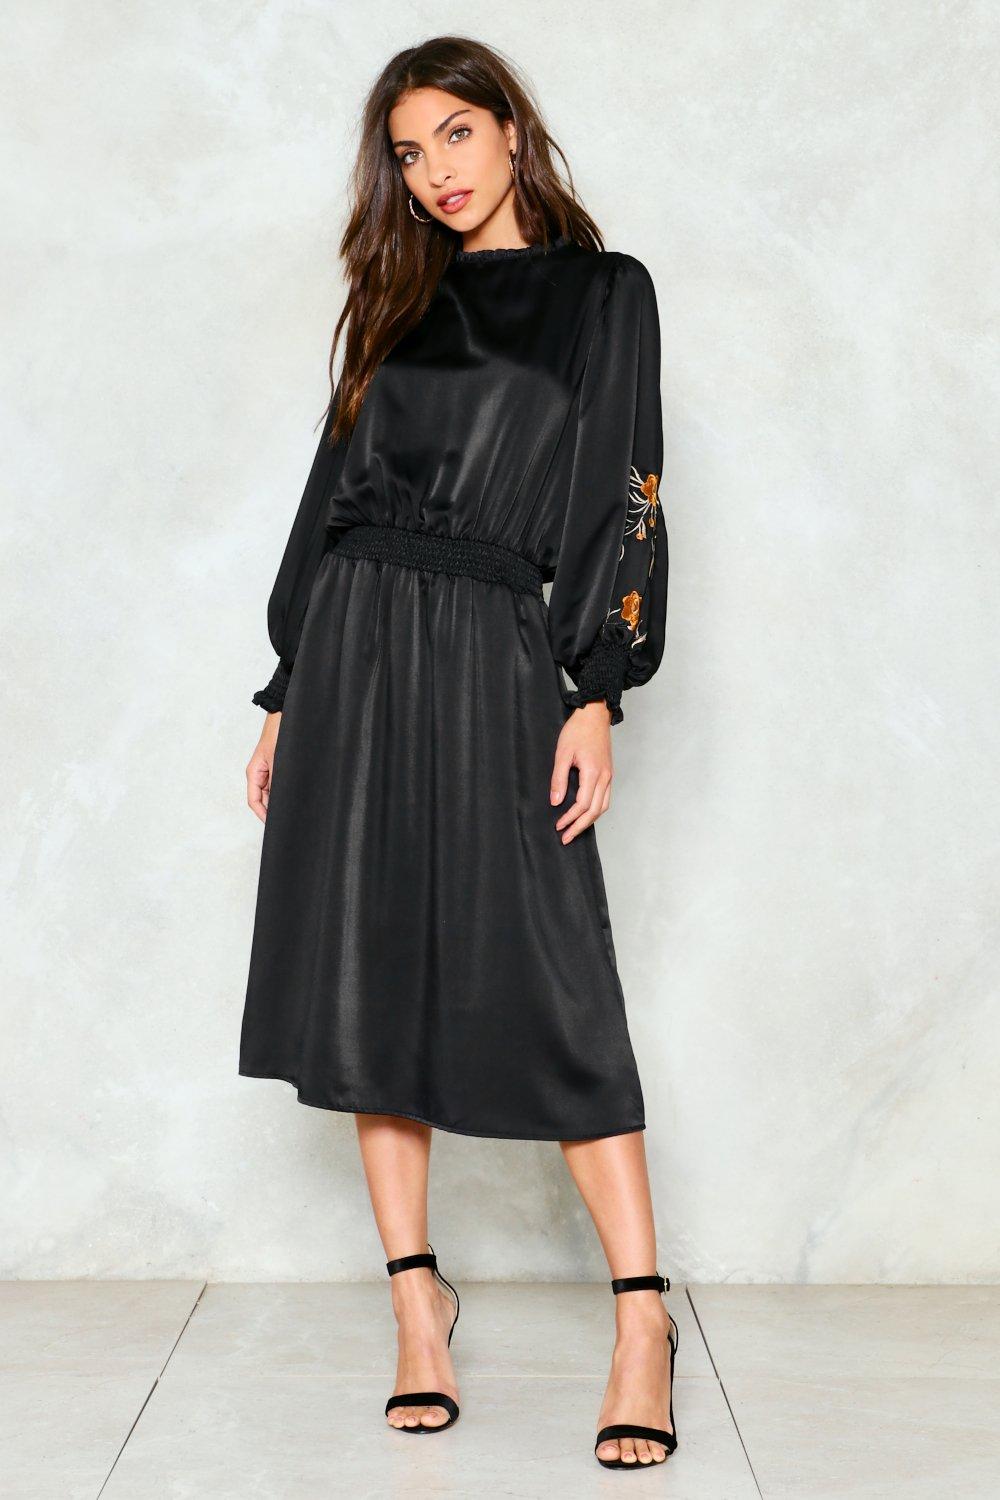 black satin dress with sleeves